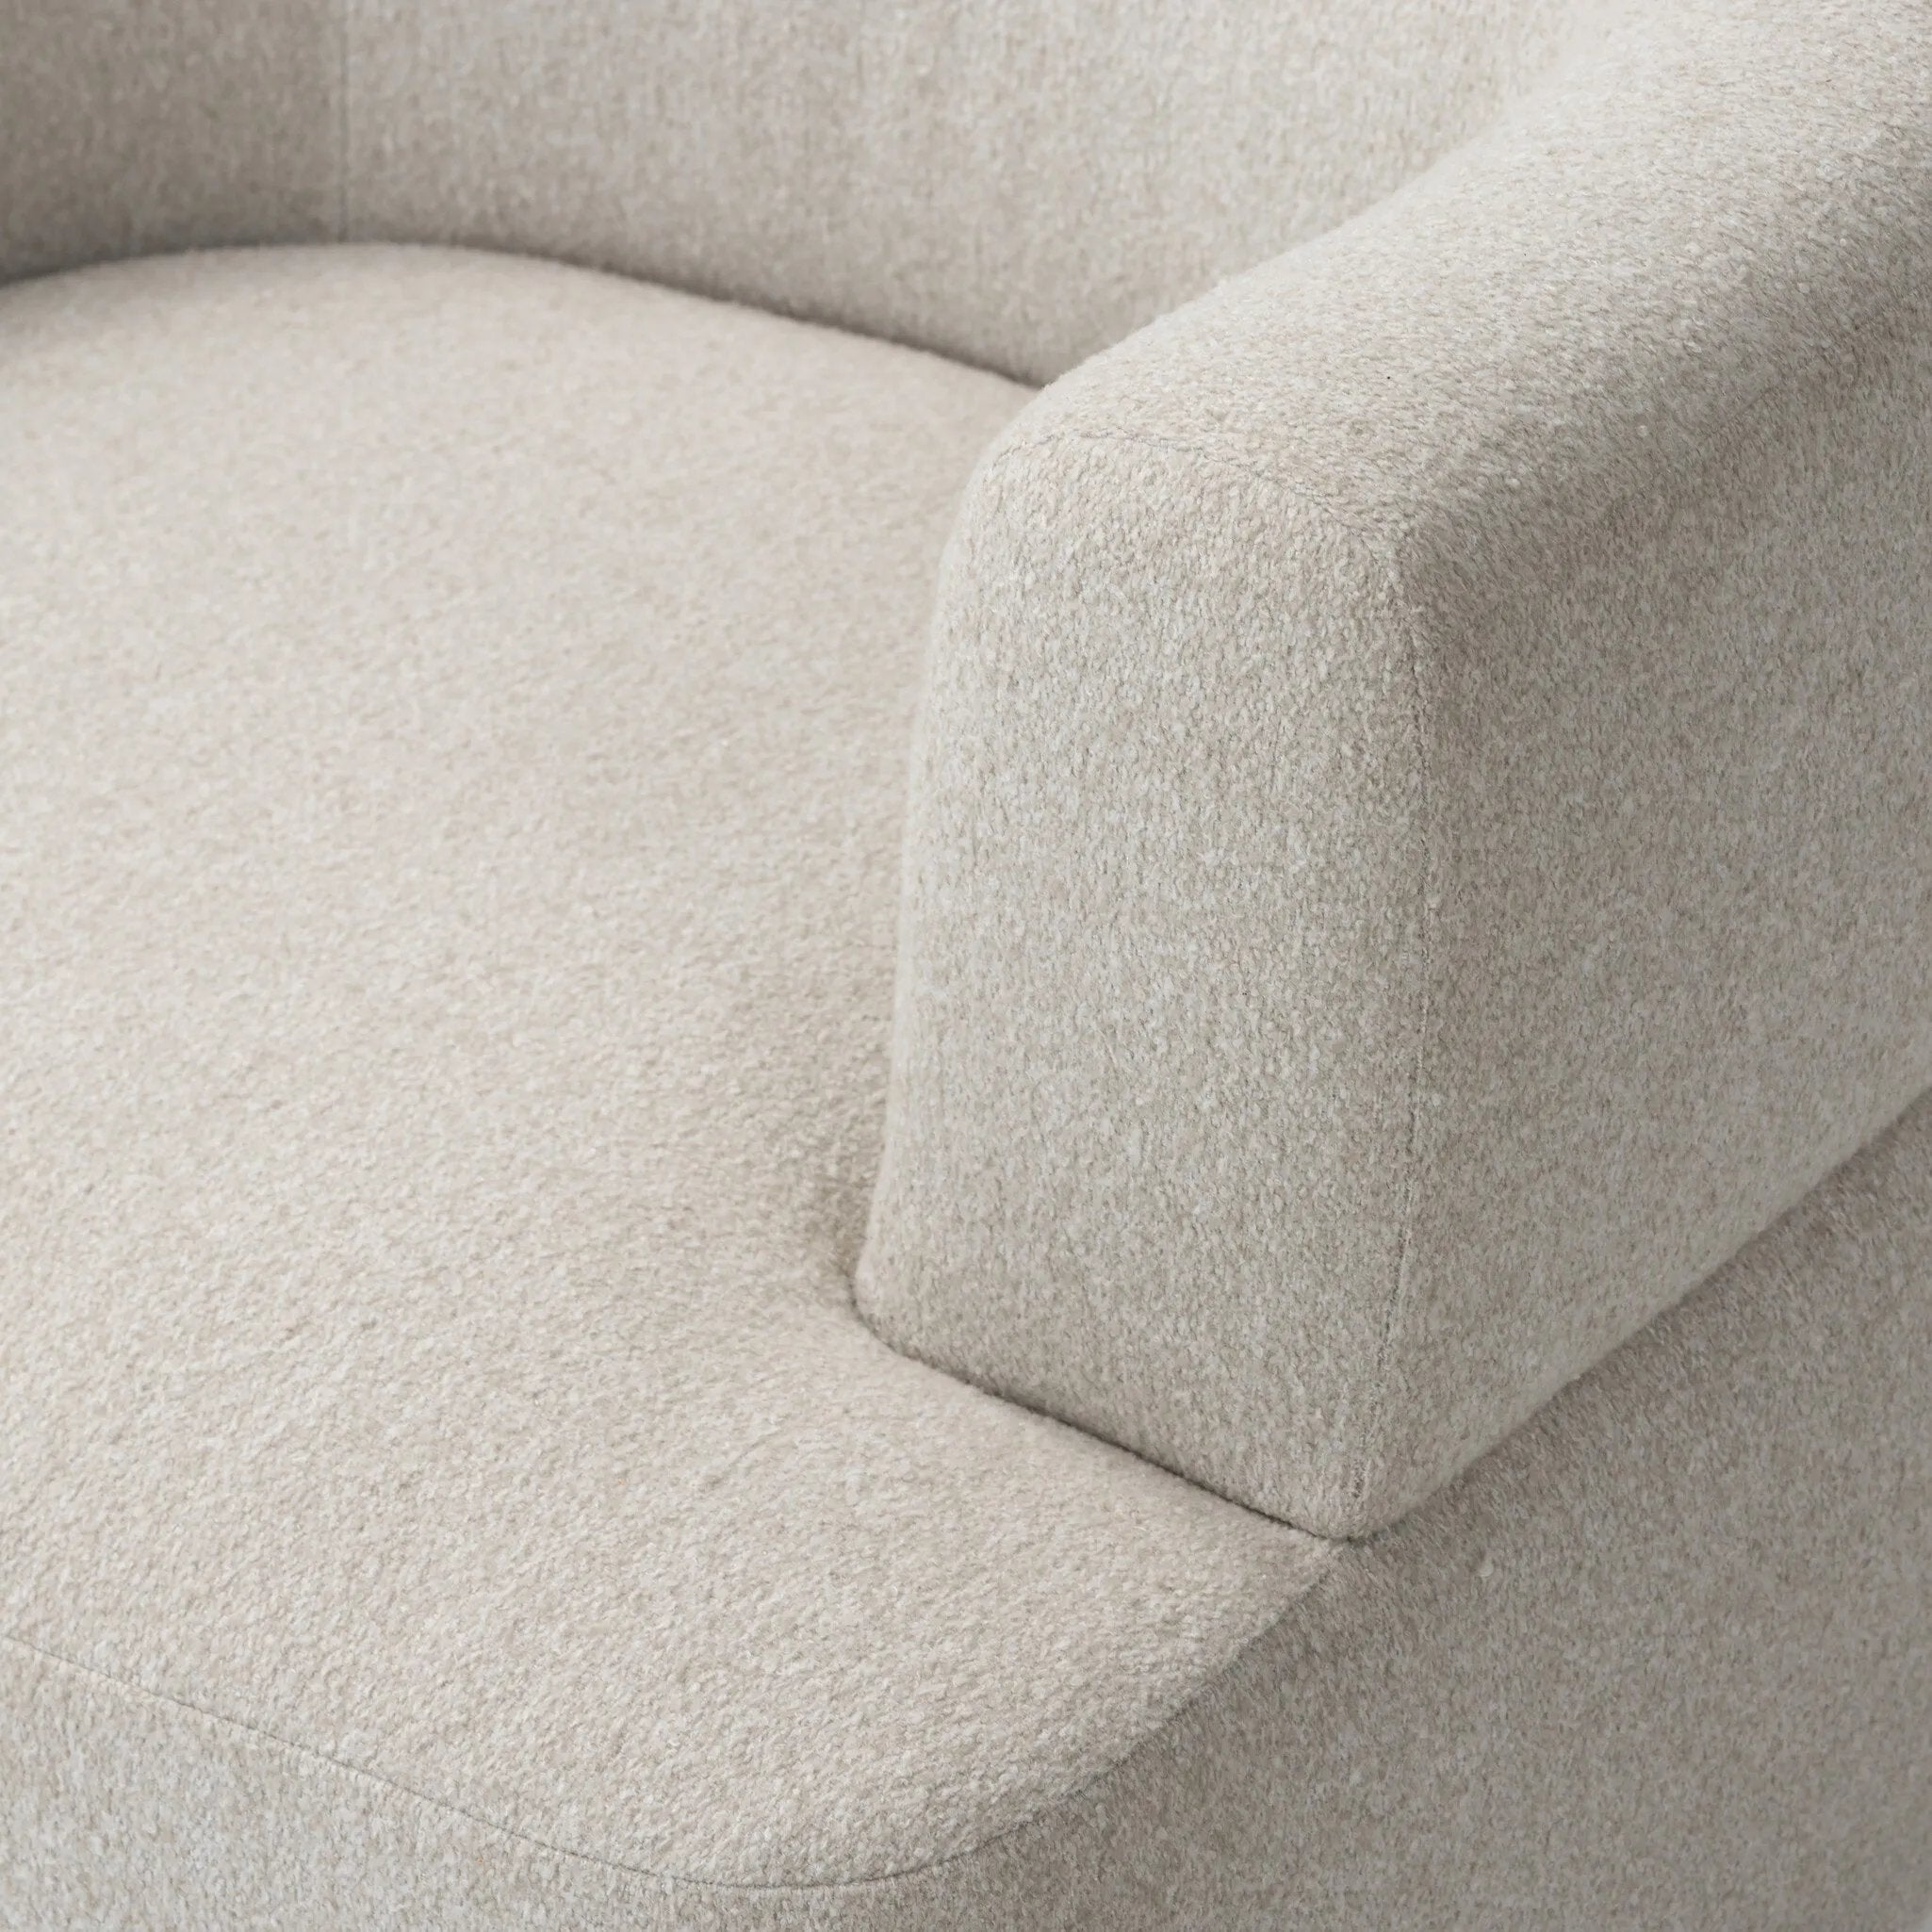 This contemporary wraparound chair melds two forms for a study in seamless balance. The seat's modern form is neutralized with an understated pebble color, while sleek cutouts emphasize the tri-leg base.Collection: Farro Amethyst Home provides interior design, new home construction design consulting, vintage area rugs, and lighting in the Miami metro area.